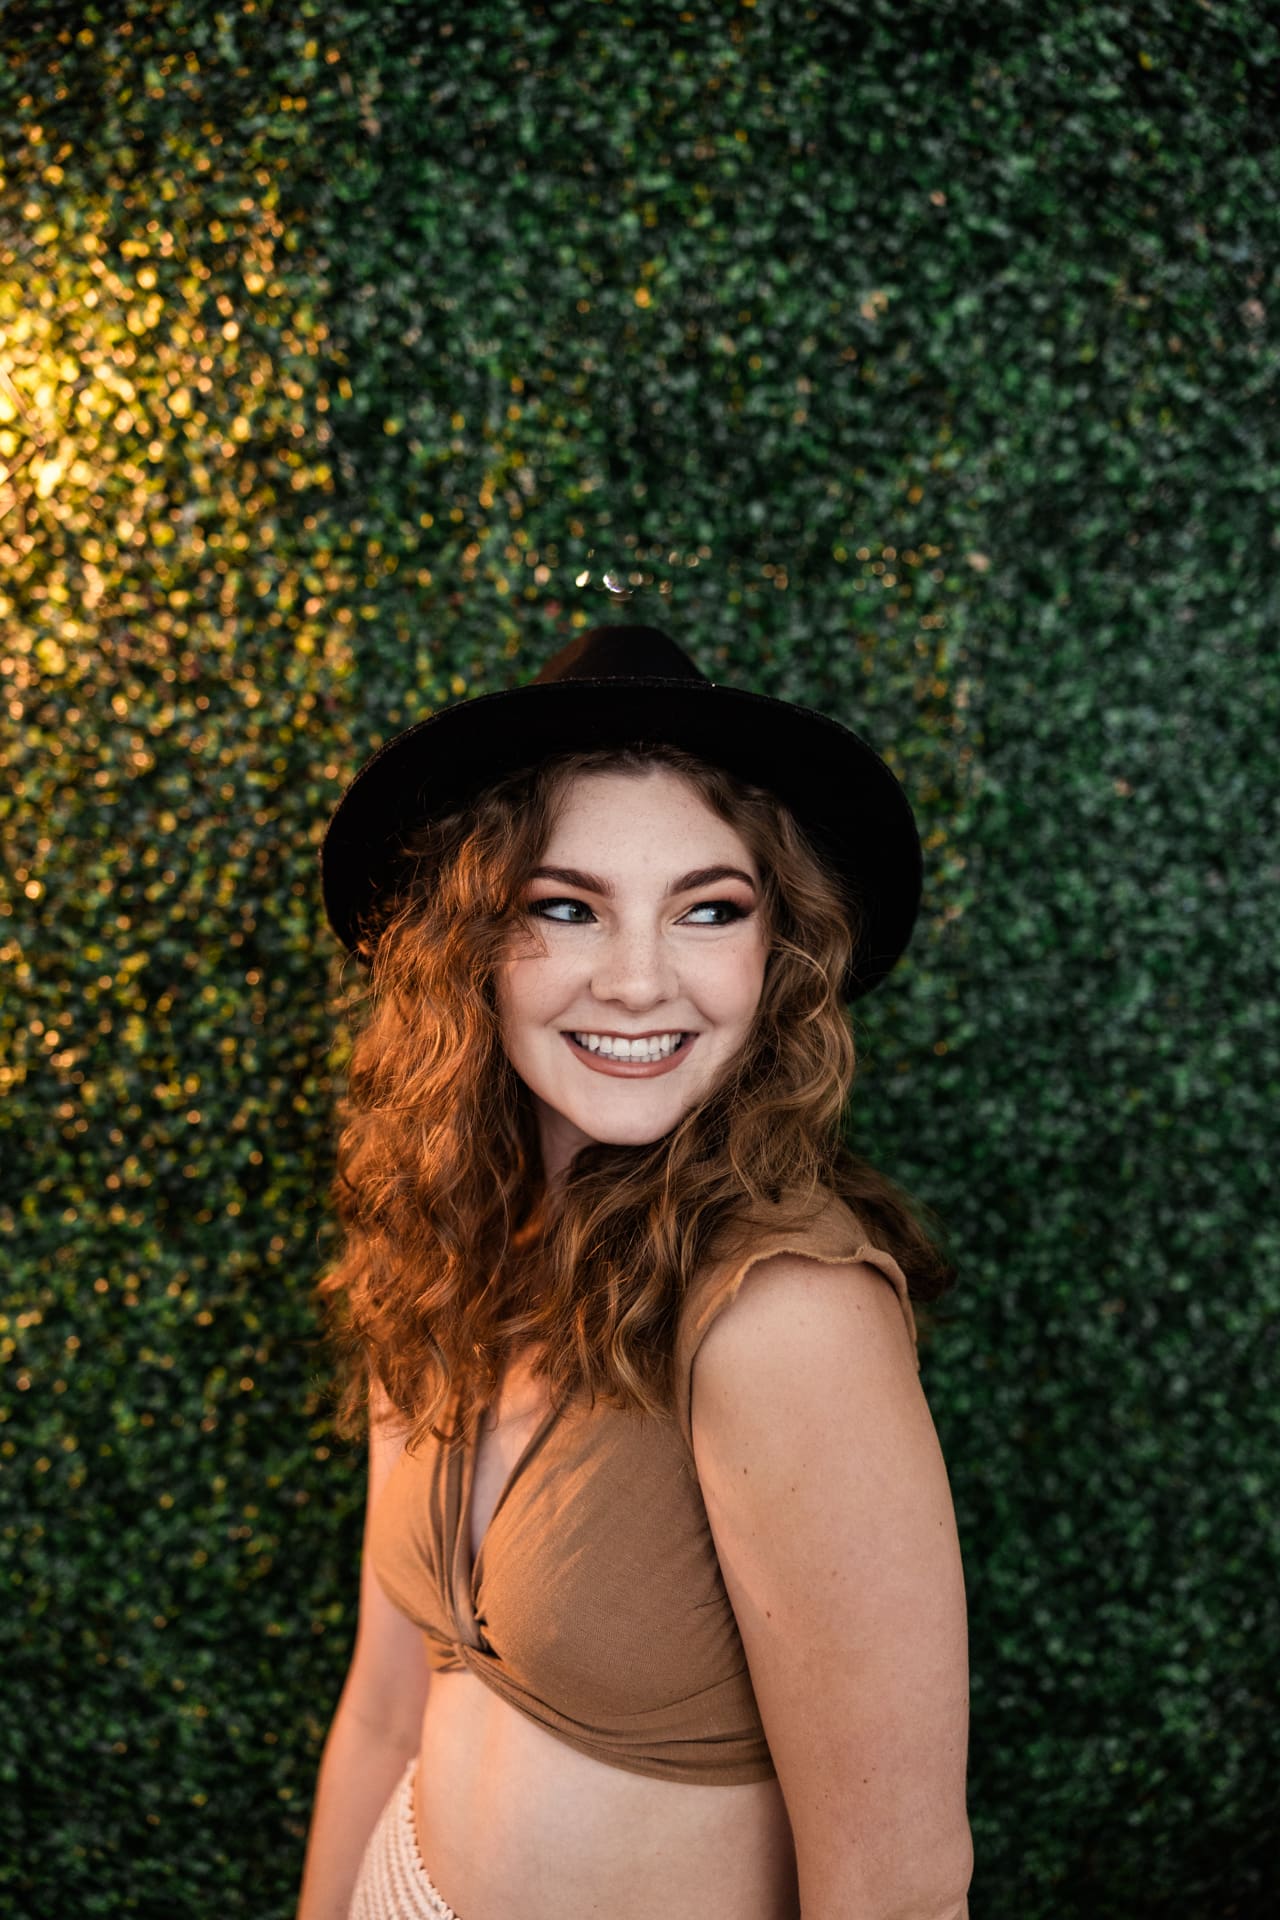 Candid photo of boho model wearing crop top and floppy black hat in front of greenery wall at Chicago photography studio P&M Studio